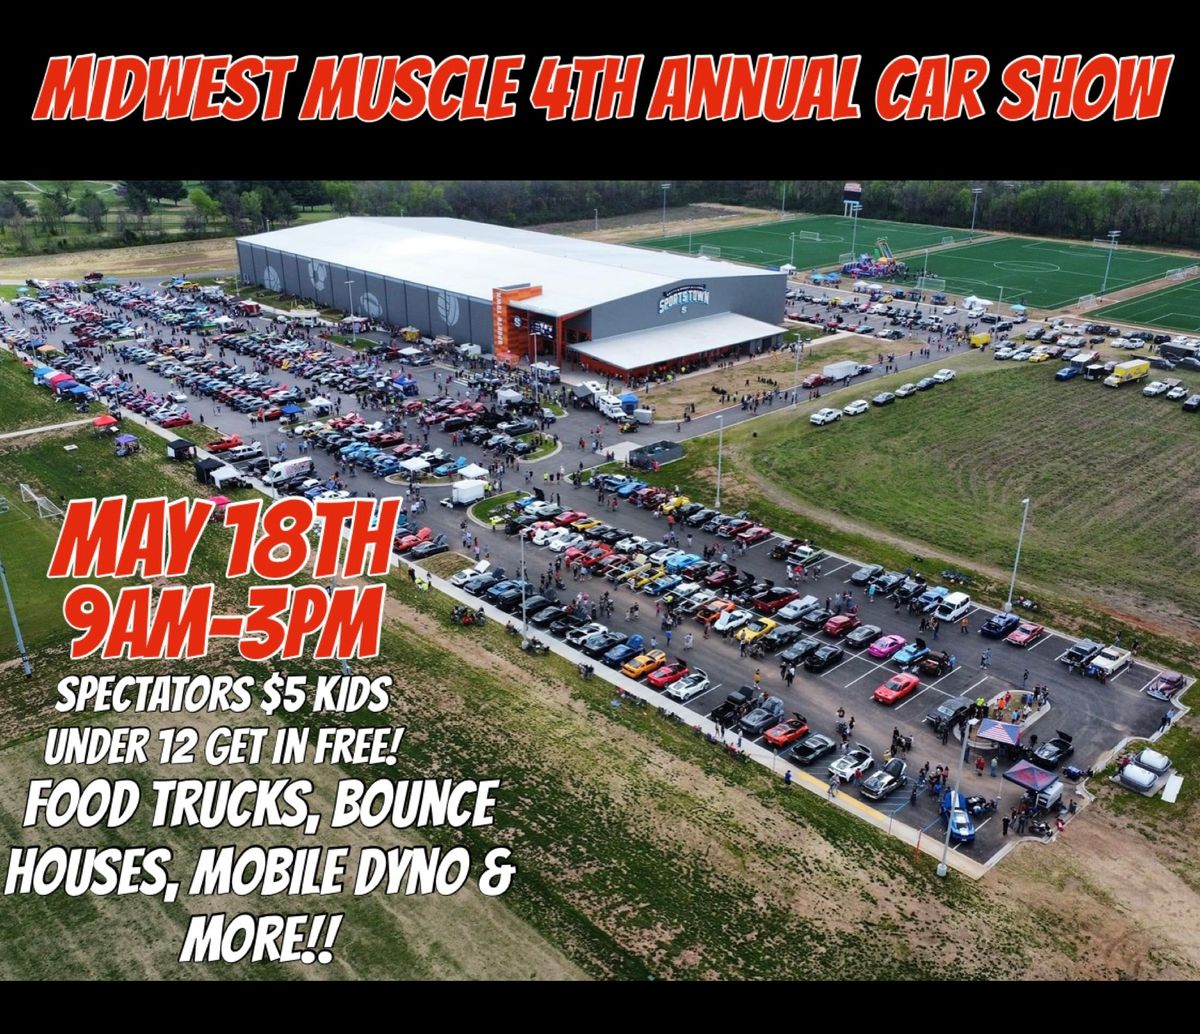 Midwest Muscle 4th Annual Muscle Car Show & Food Truck Event